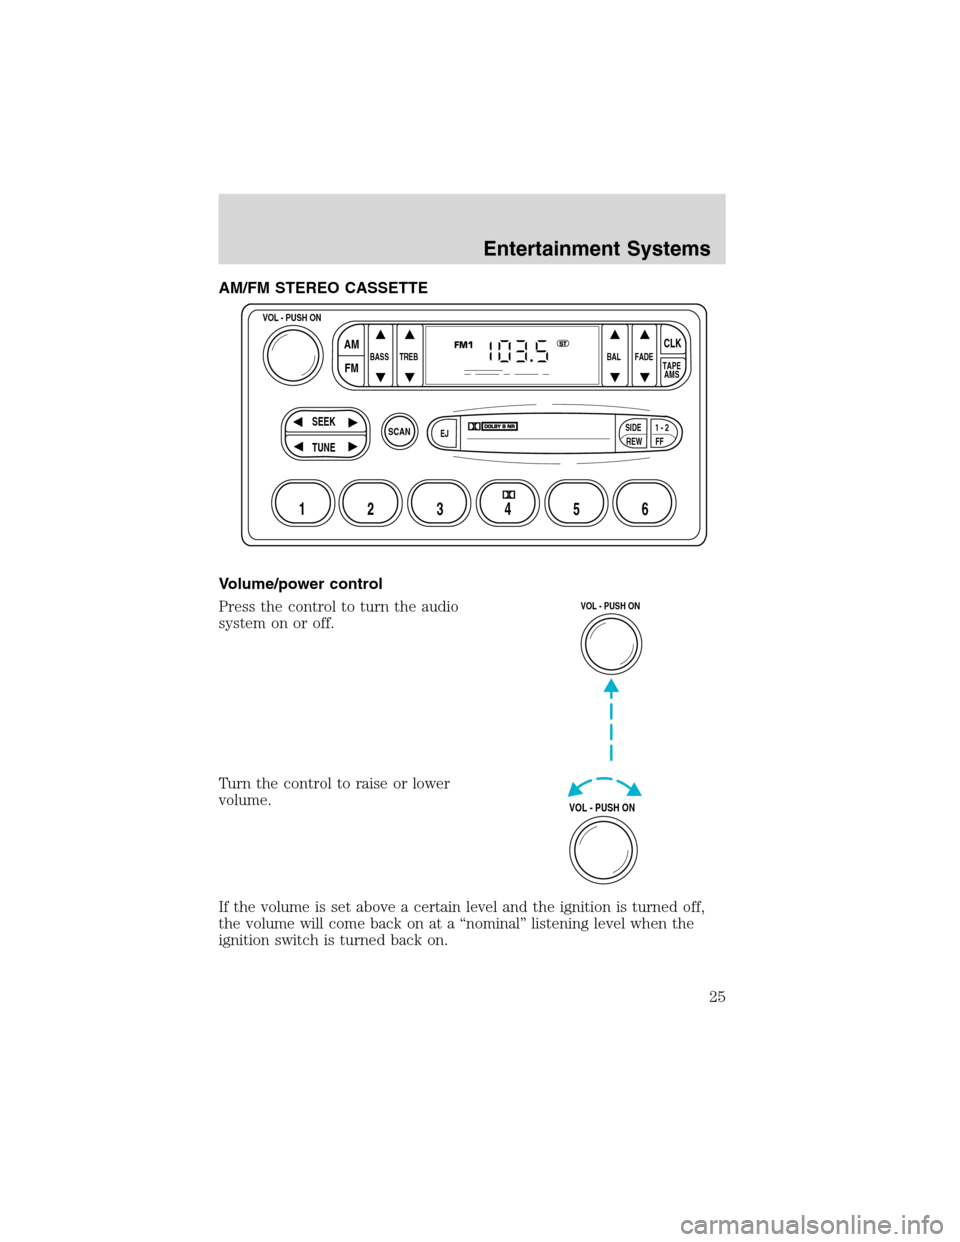 FORD F750 2003 10.G Owners Manual AM/FM STEREO CASSETTE
Volume/power control
Press the control to turn the audio
system on or off.
Turn the control to raise or lower
volume.
If the volume is set above a certain level and the ignition 